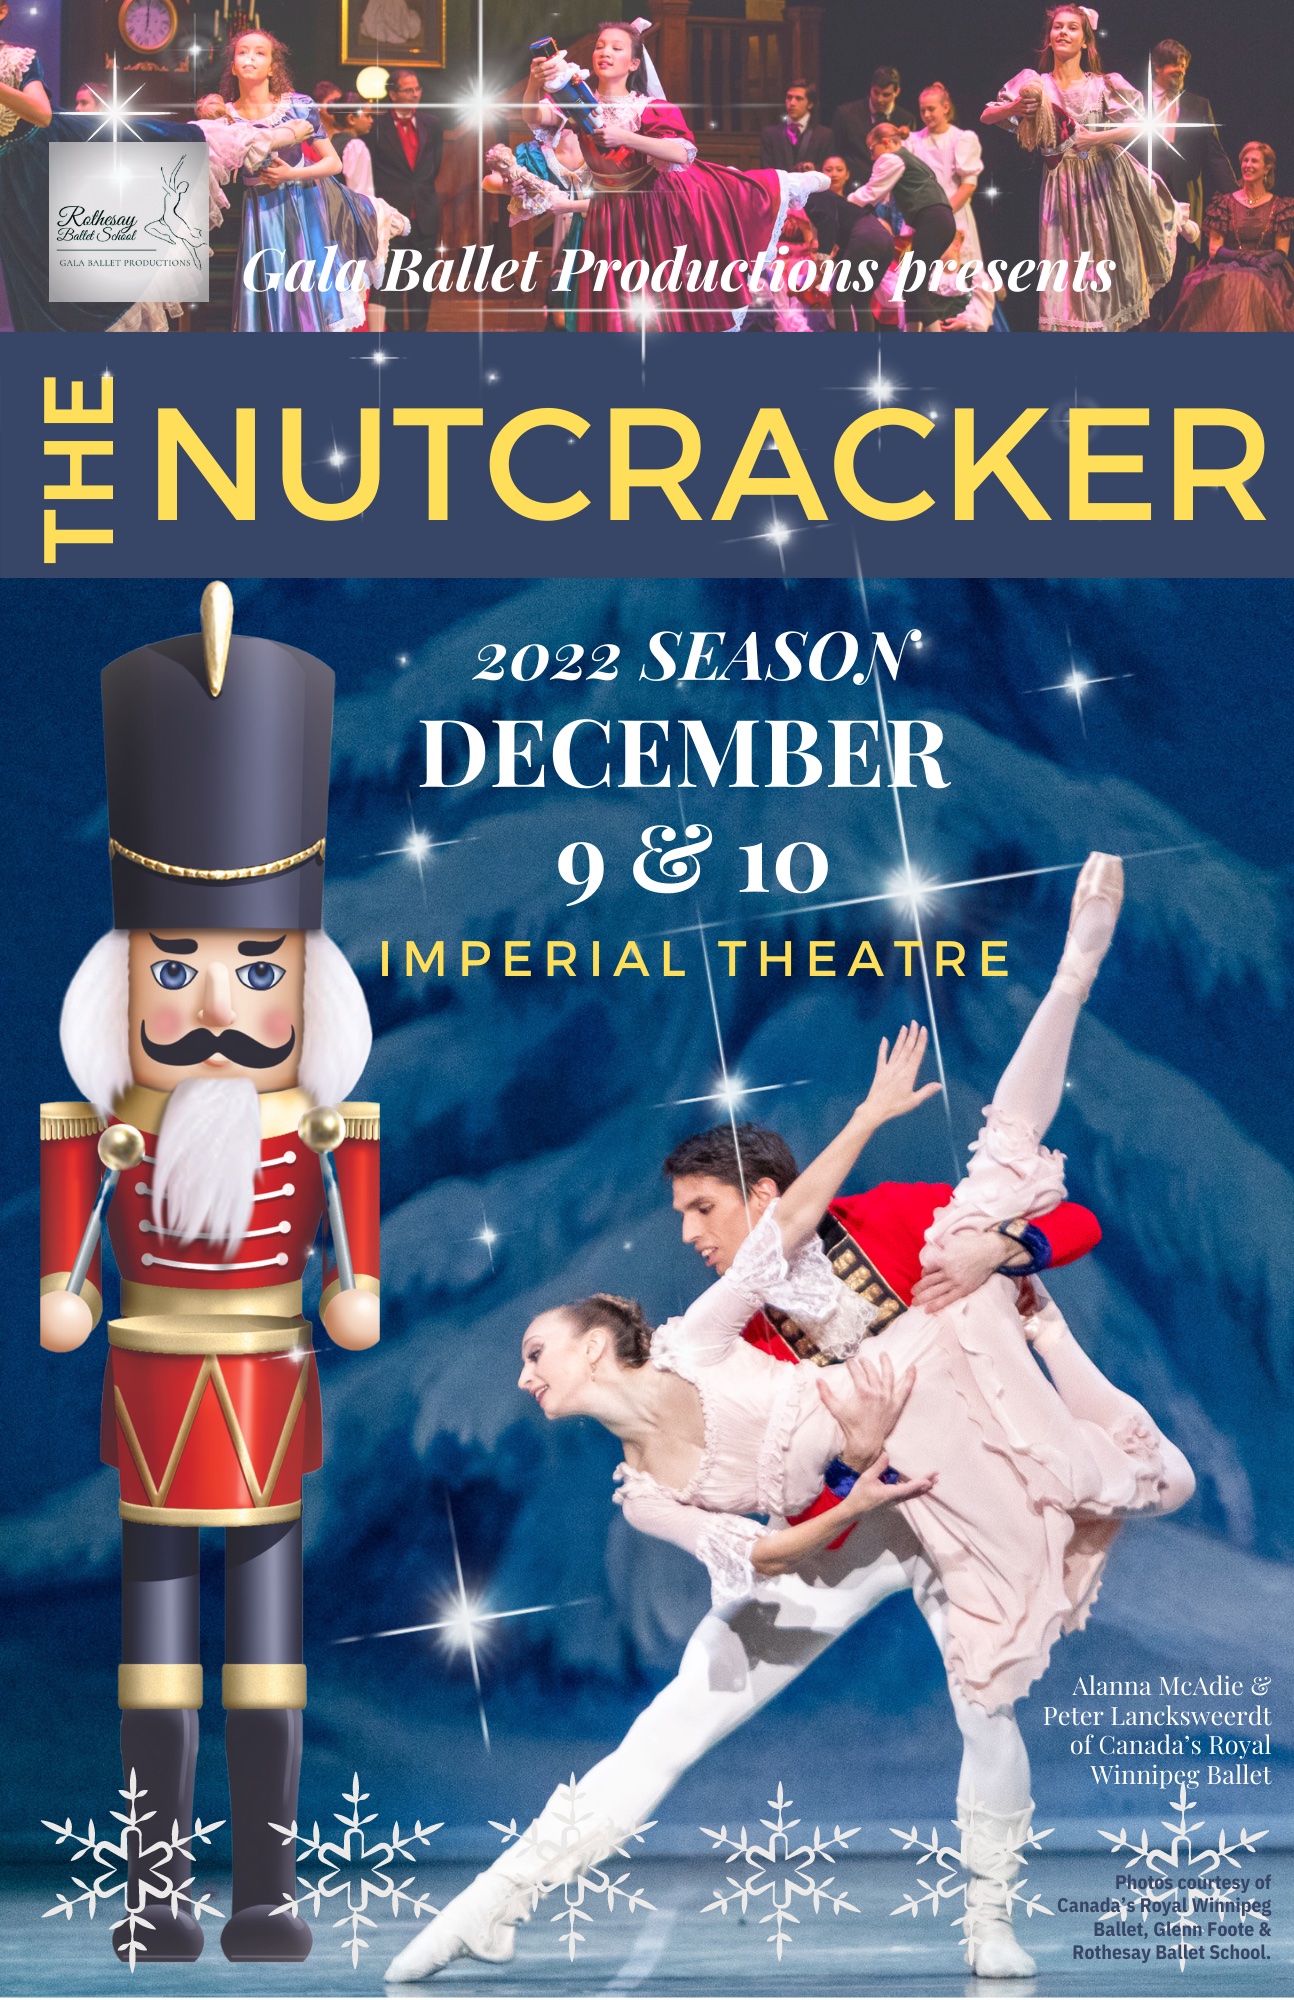 Gala Ballet Productions presents the Nutcracker 2022 season, December 9 and 10 at the Imperial Theatre. Alanna McAdie and Peter Lancsweerdt of Canada's Royal Winnipege Ballet